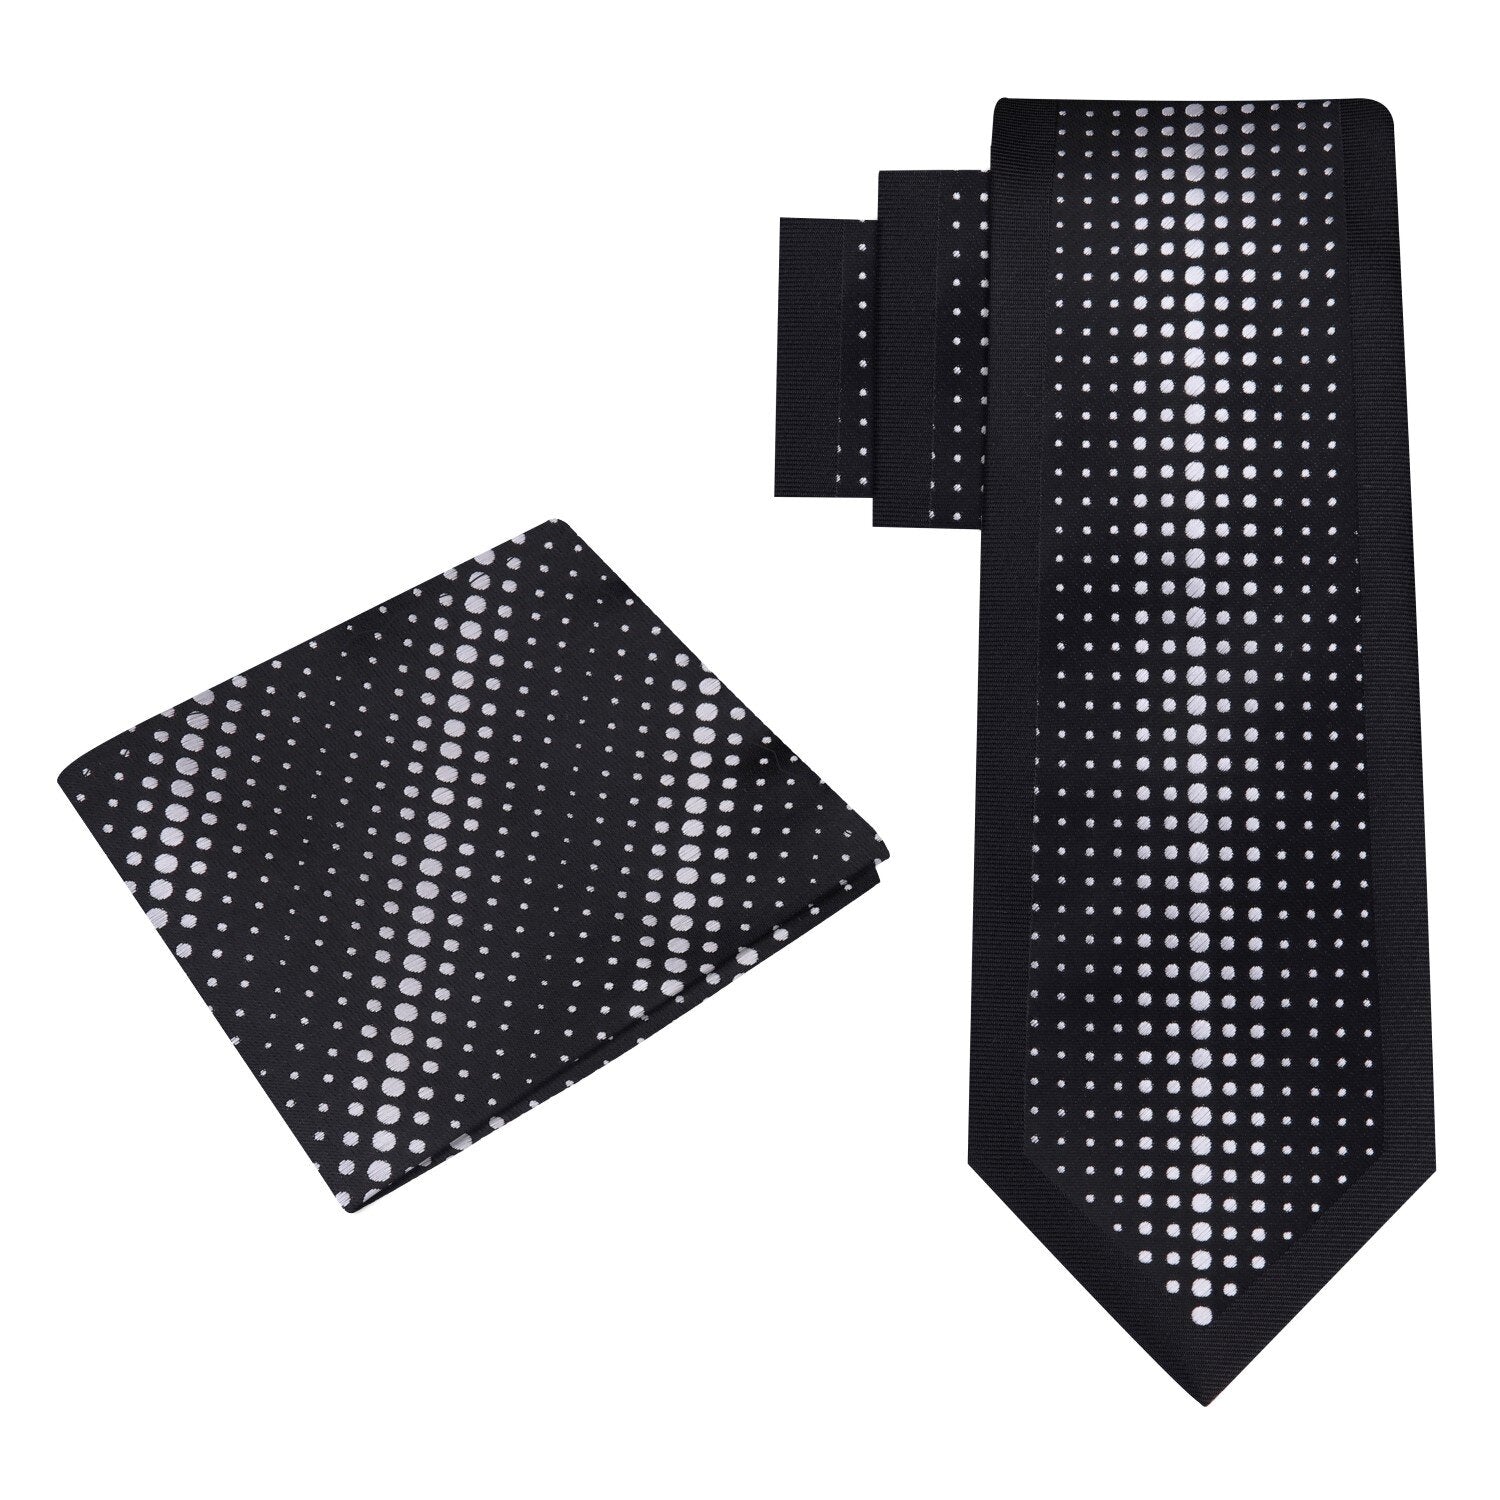 Alt View: Black and Silver Dots Tie and Pocket Square